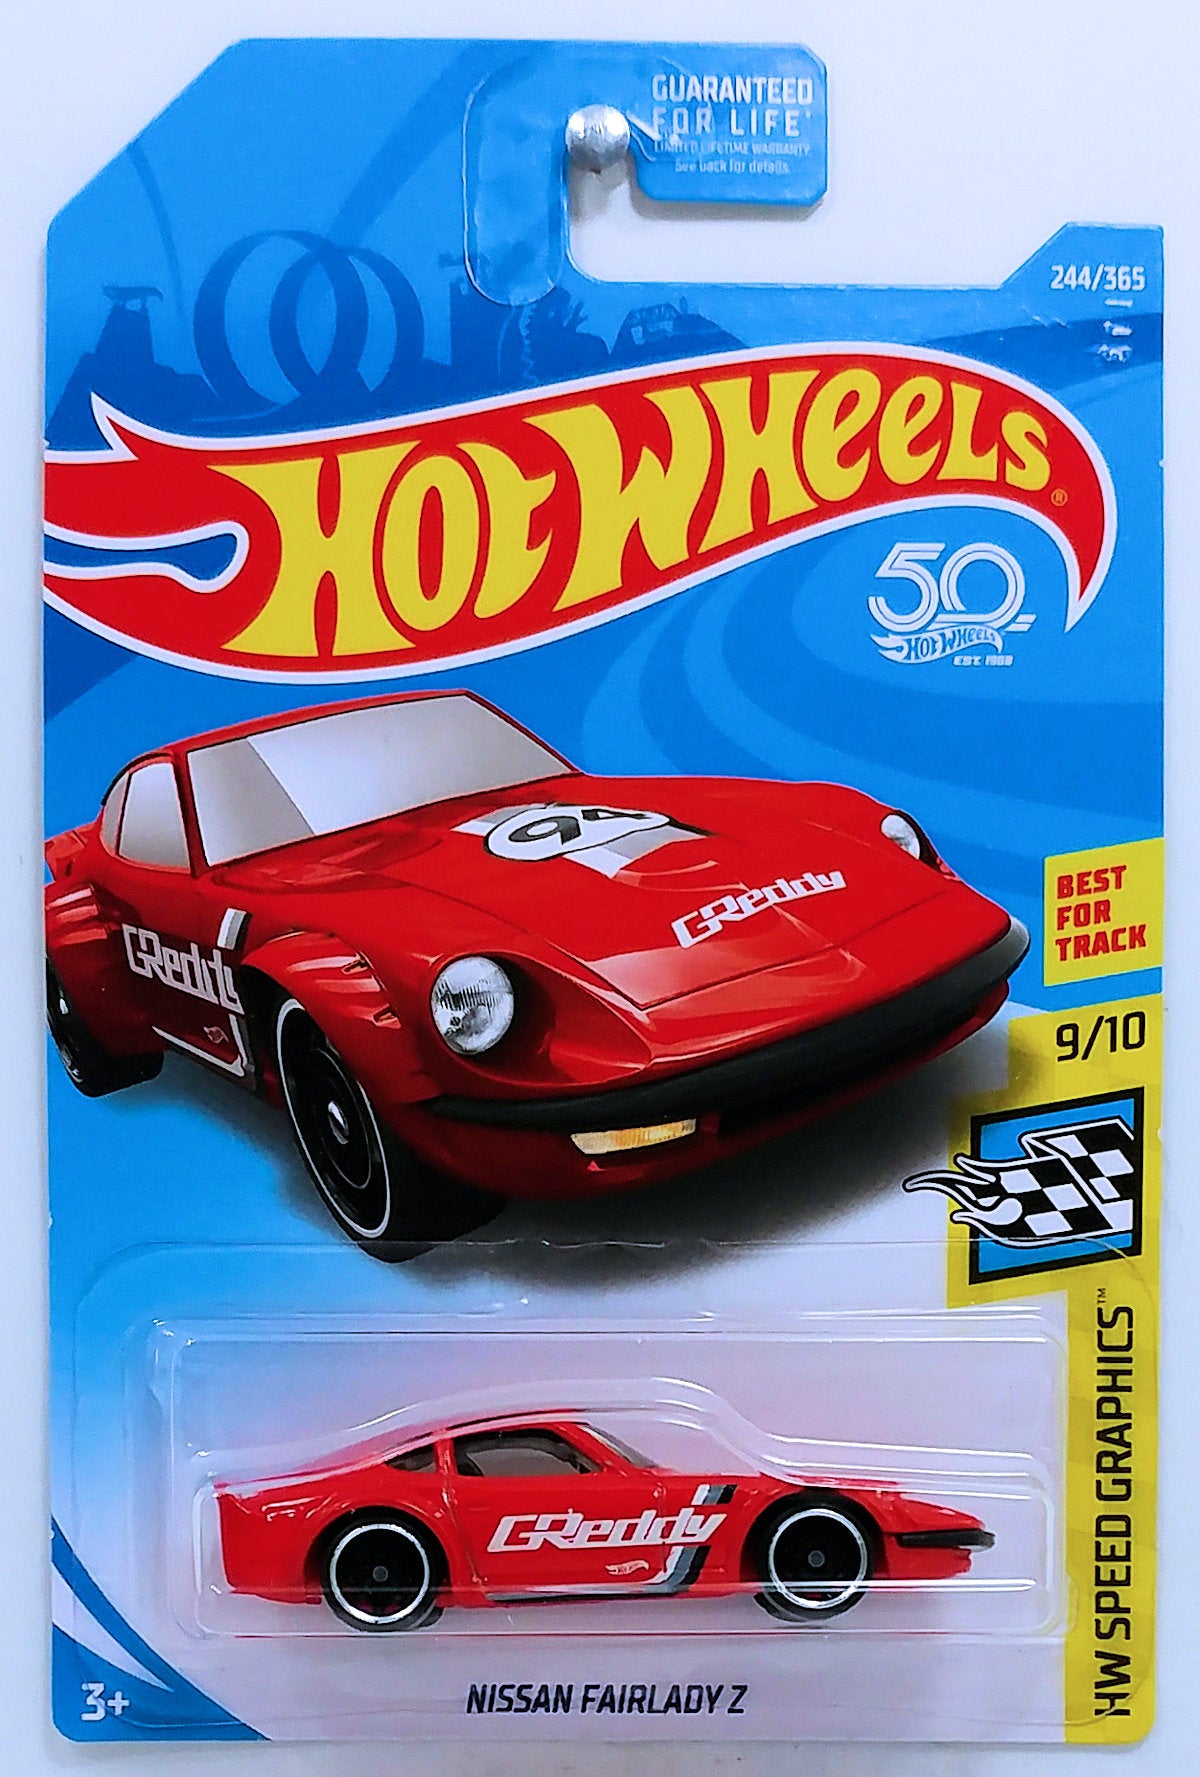 Hot Wheels 2018 - Collector # 244/365 - HW Speed Graphics 9/10 - Nissan Fairlady Z - Red / GReddy - 50th Card